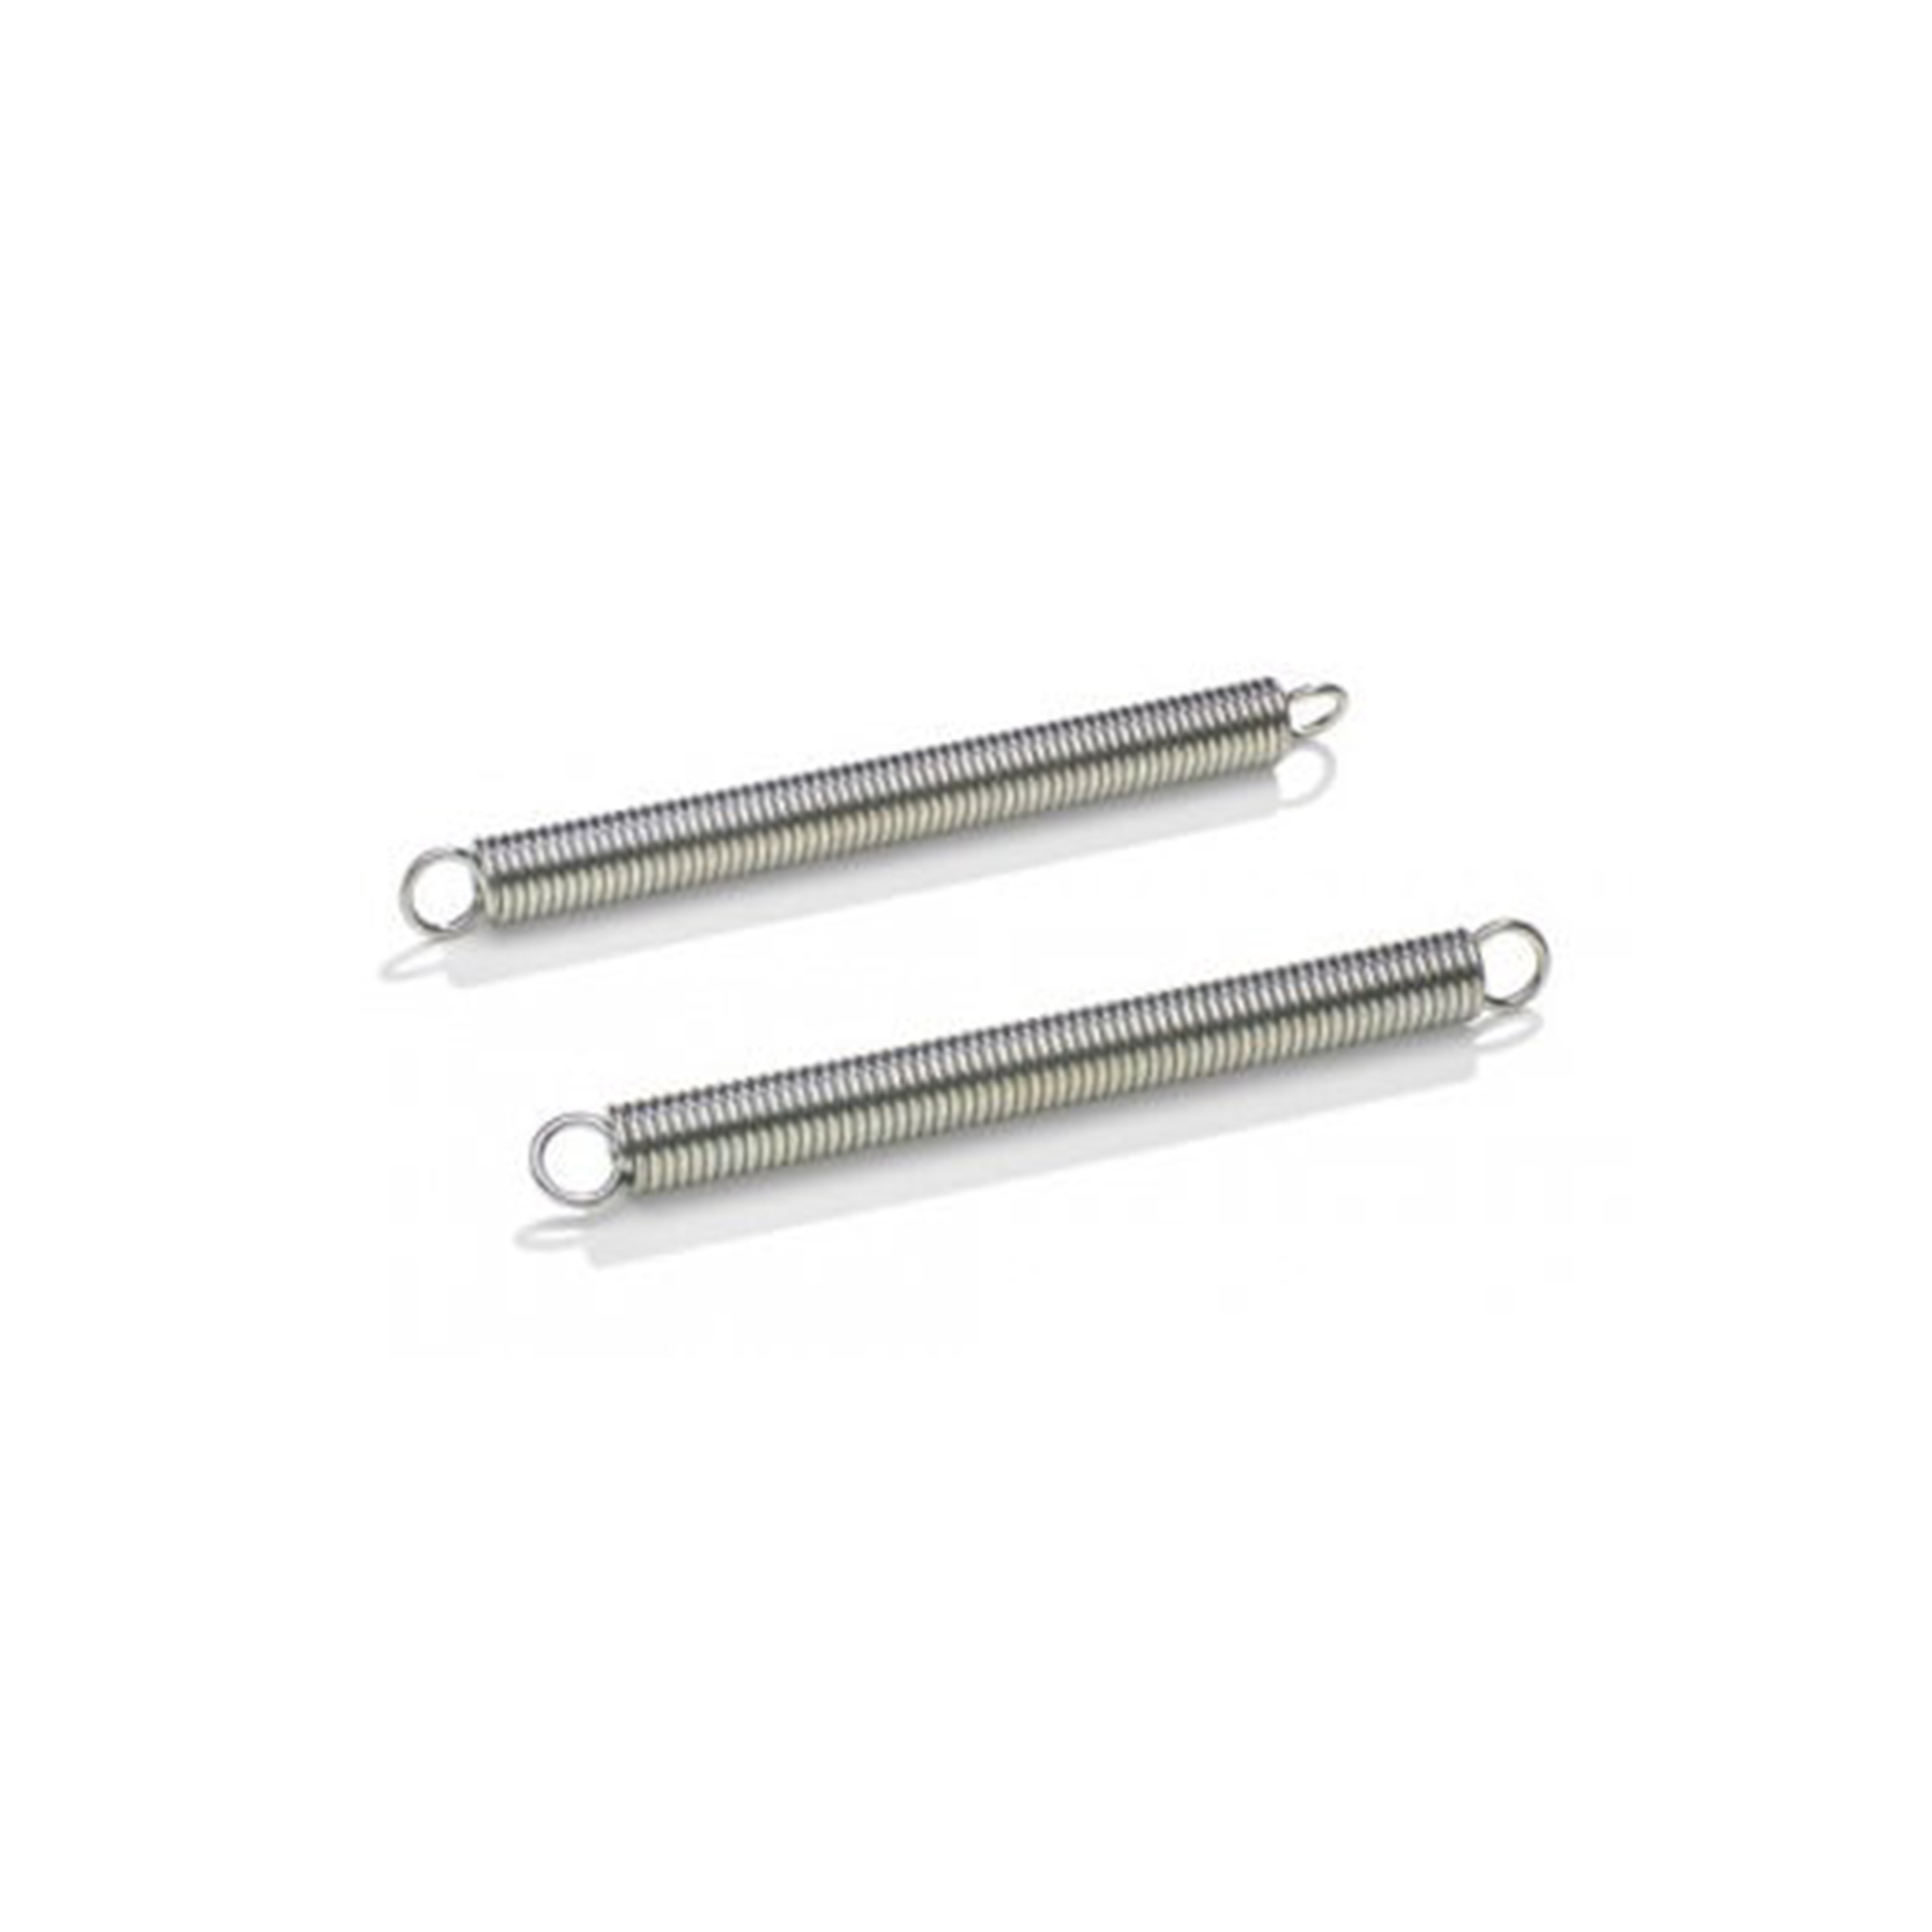 【12404】(1) REPLACEMENT NICKEL PLATED ST